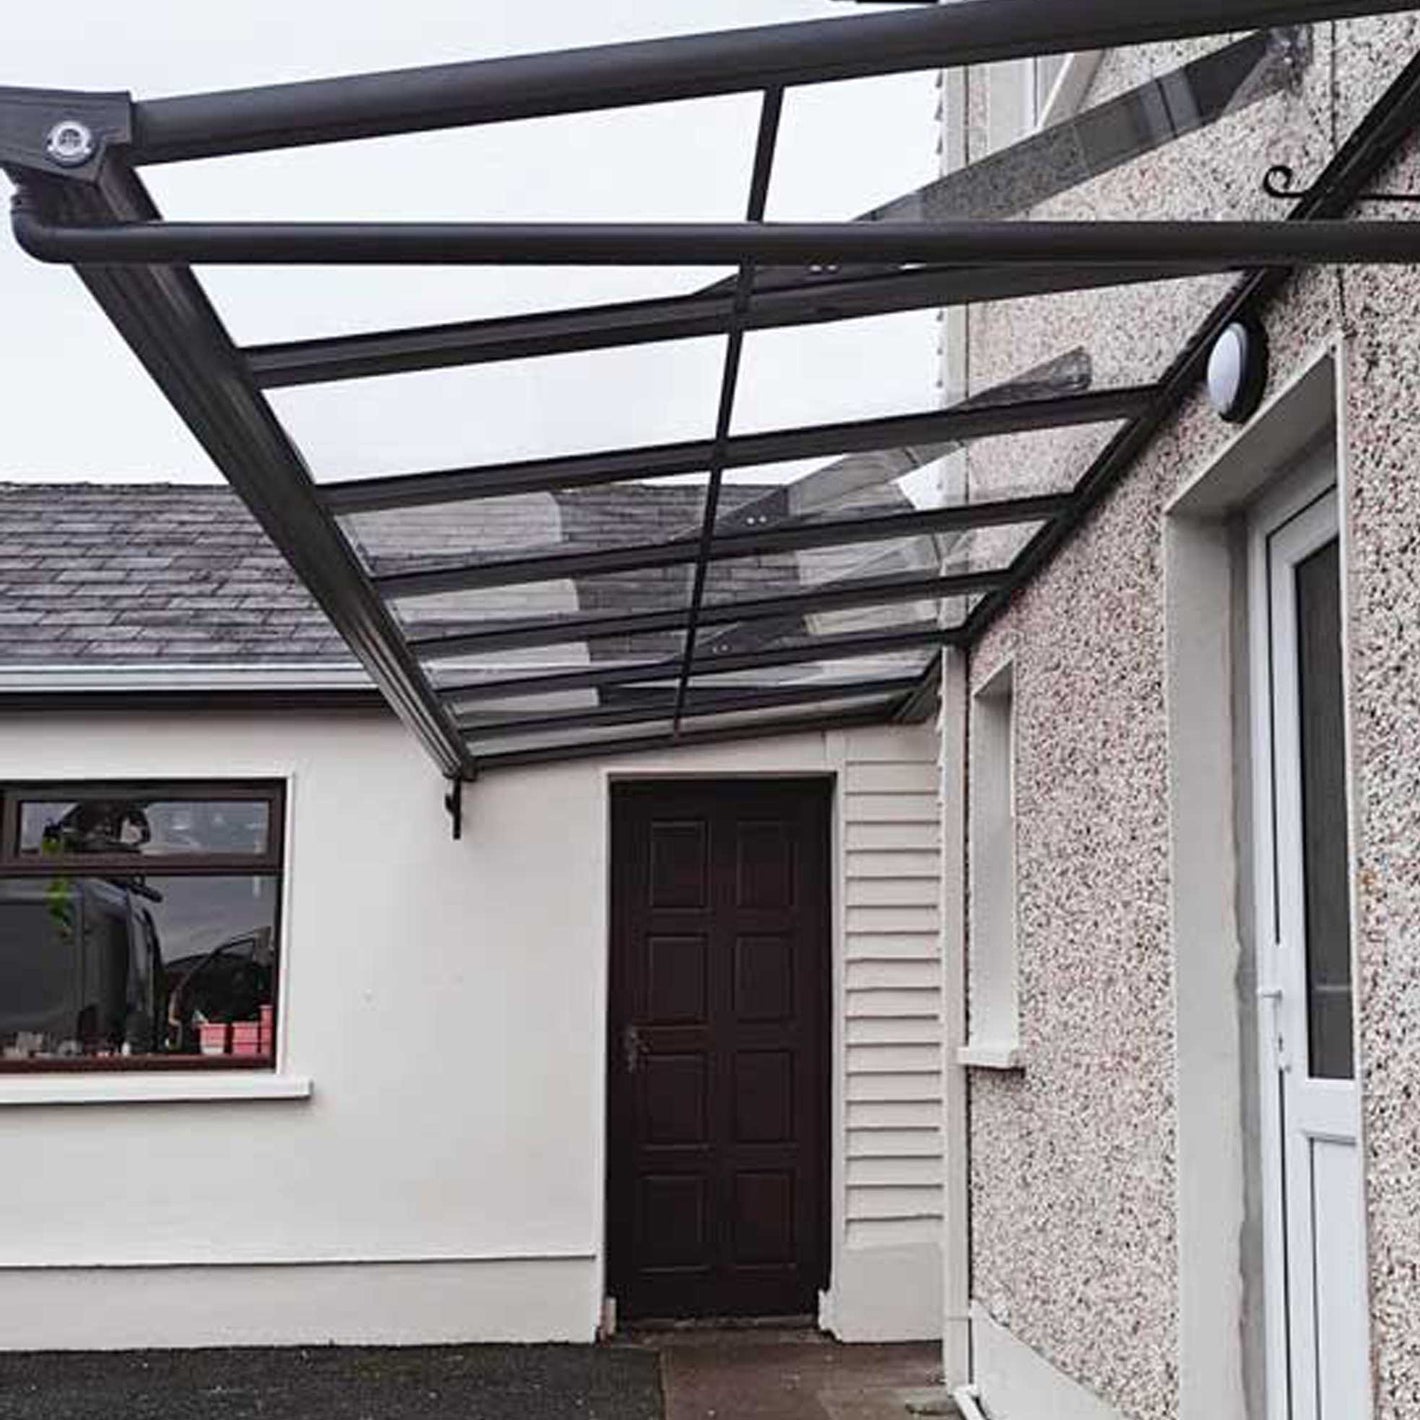 Bespoke canopy in Cloone, County Leitrim